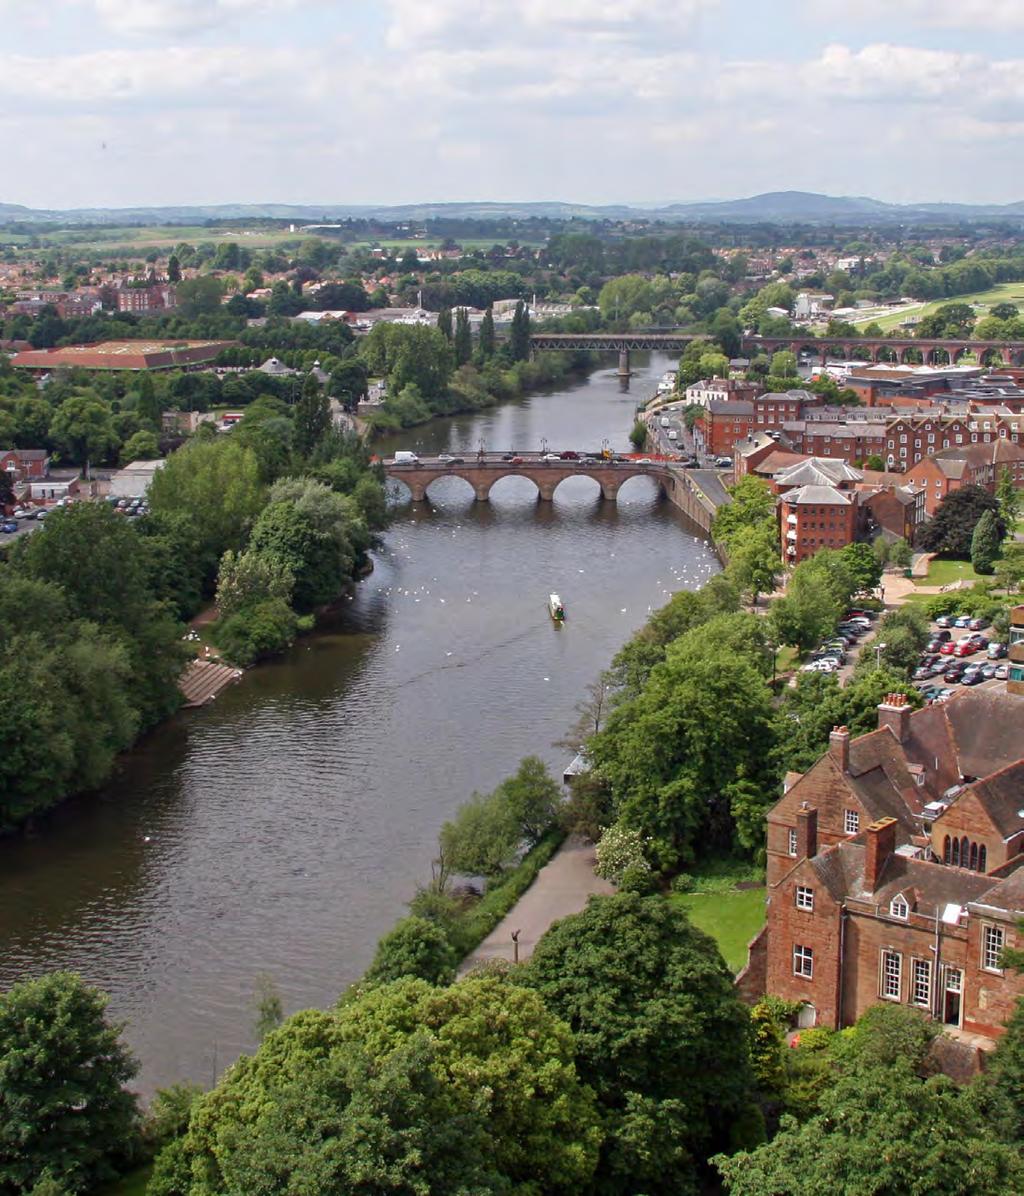 WORCESTERSHIRE One of the smallest counties in the UK, Worcestershire is a rural area of the midlands, bordering Herefordshire, Shropshire, Staffordshire, West Midlands, Warwickshire and